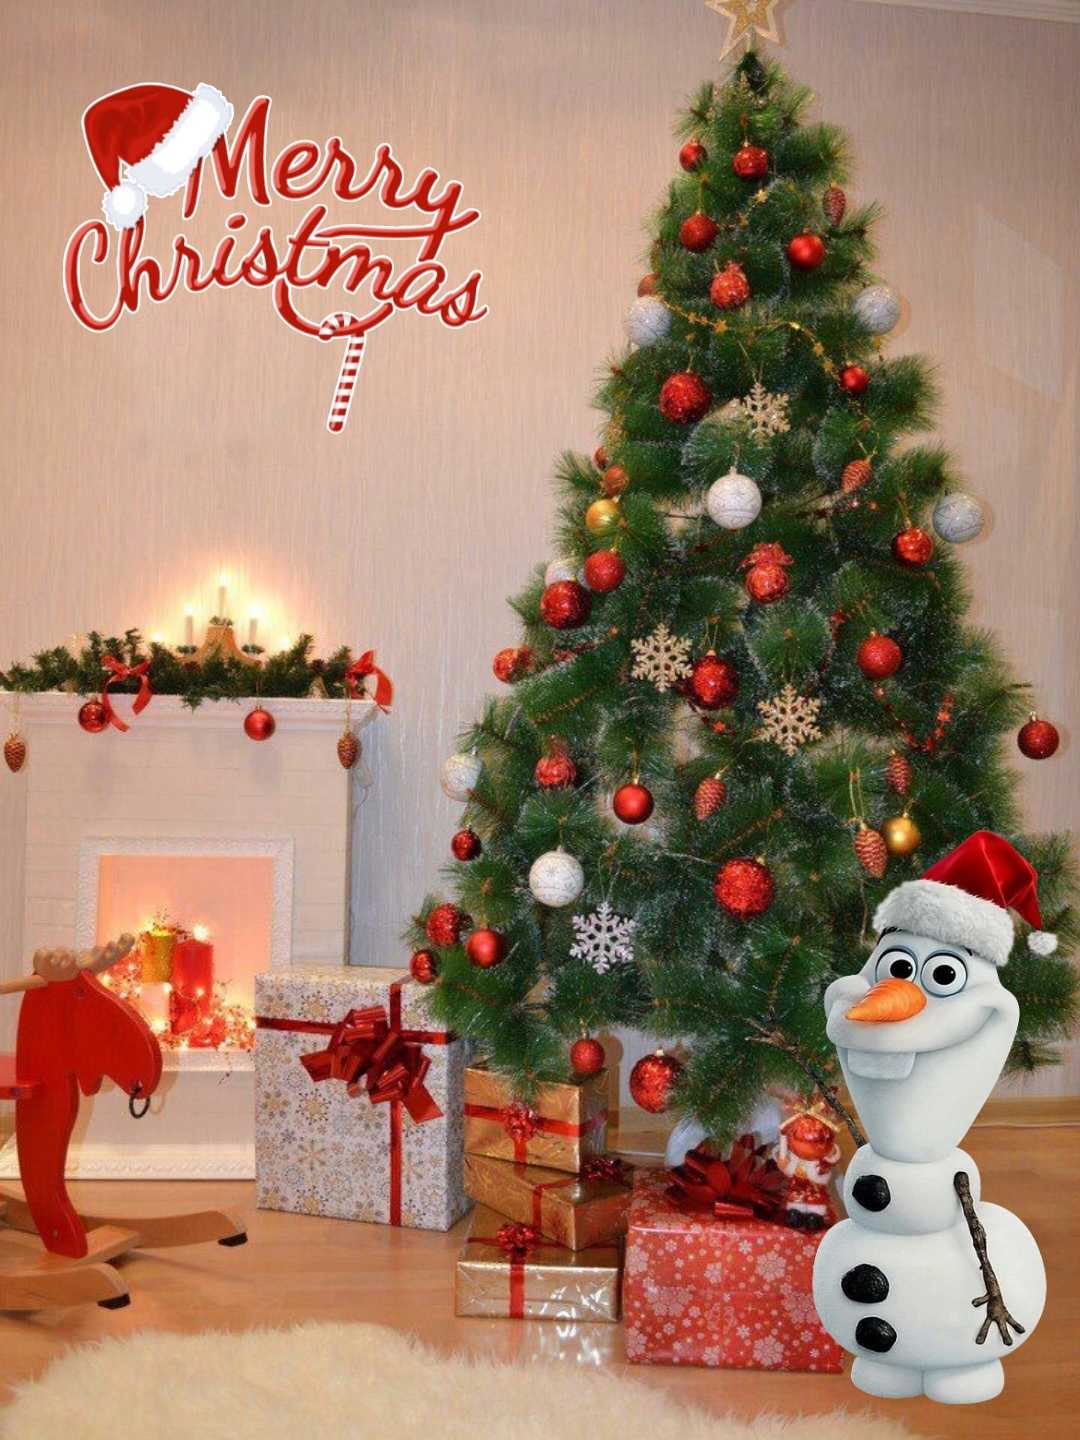 Christmas Background Images - Free Download